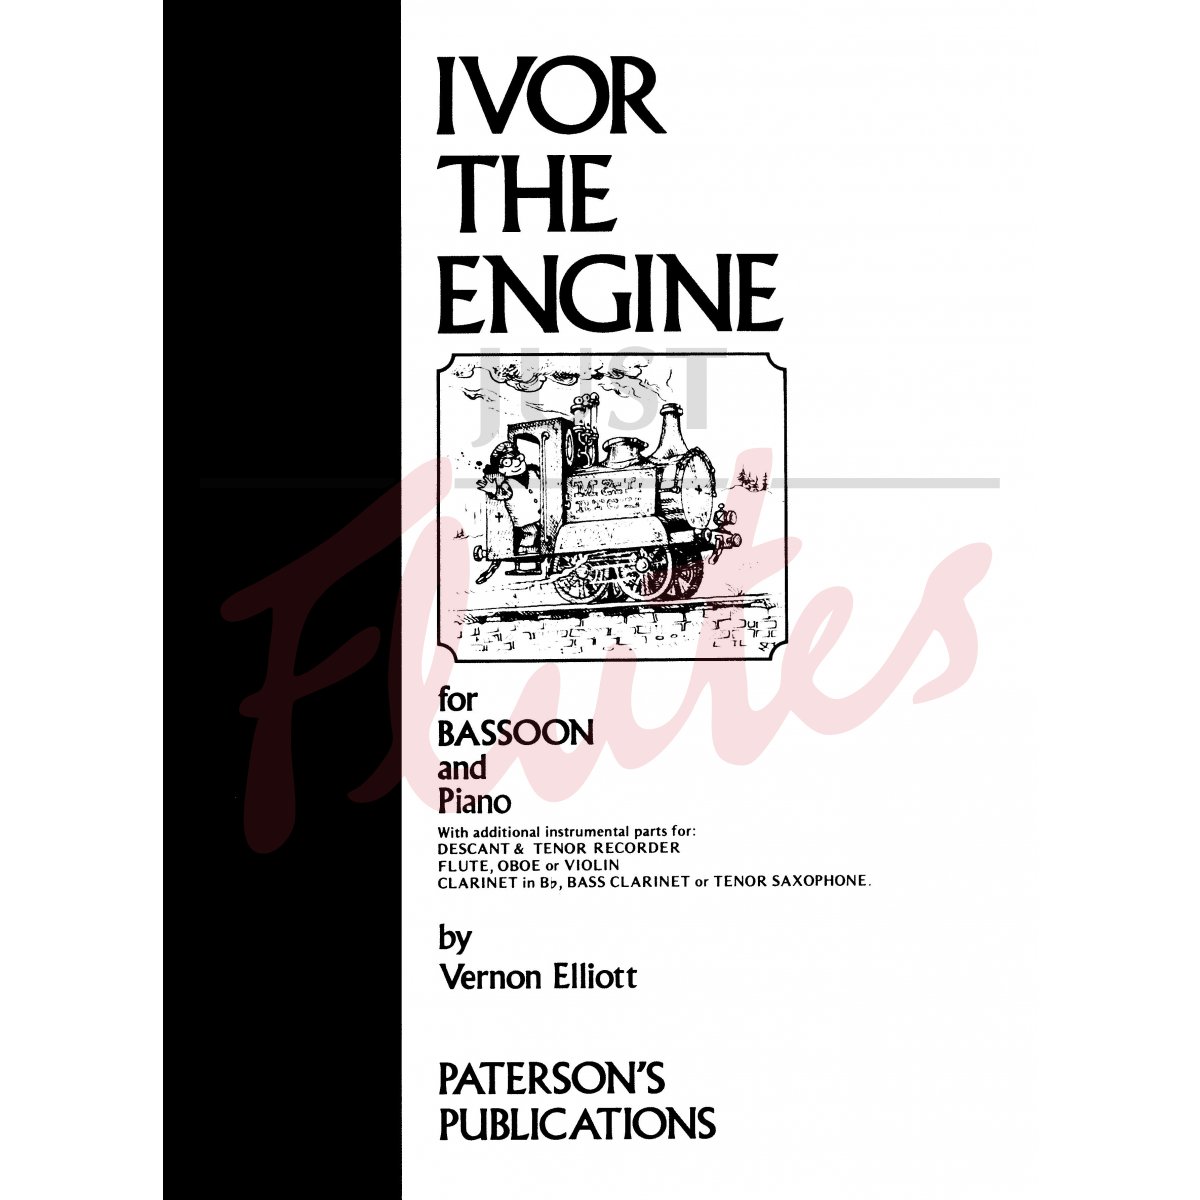 Ivor the Engine for Bassoon and Piano